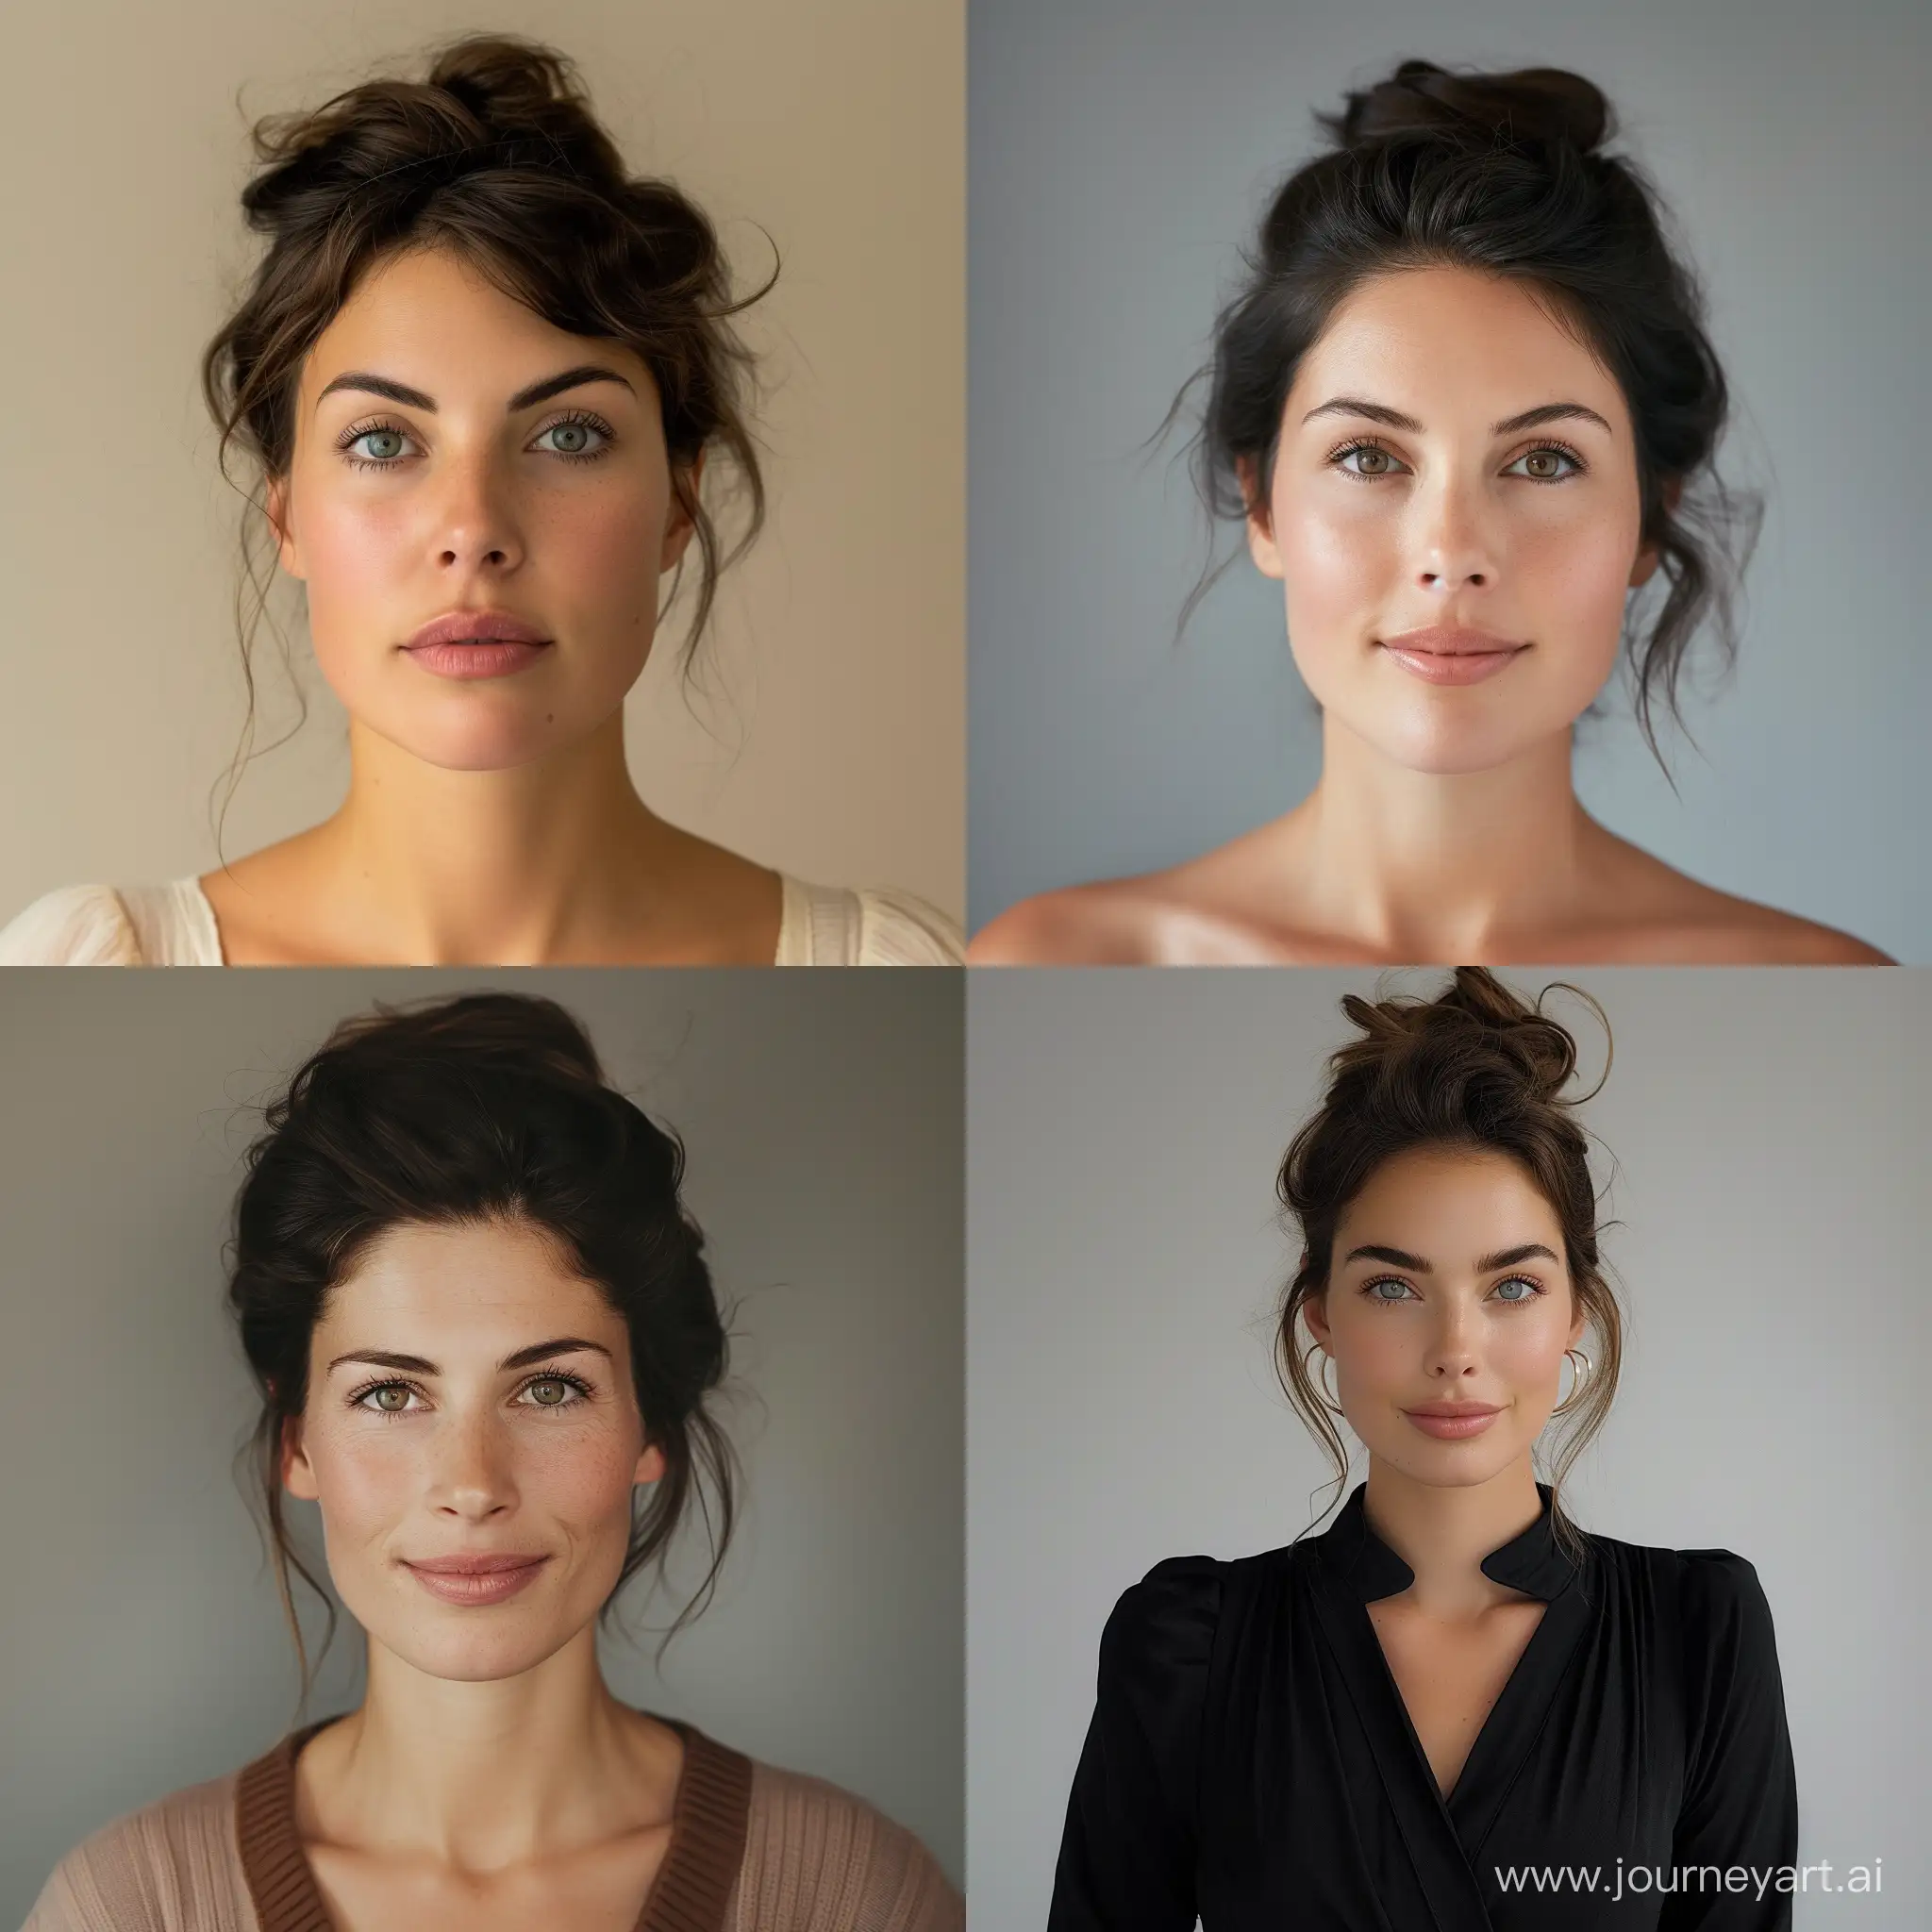 Confident-Woman-with-Updo-Hairstyle-and-Warm-Undertones